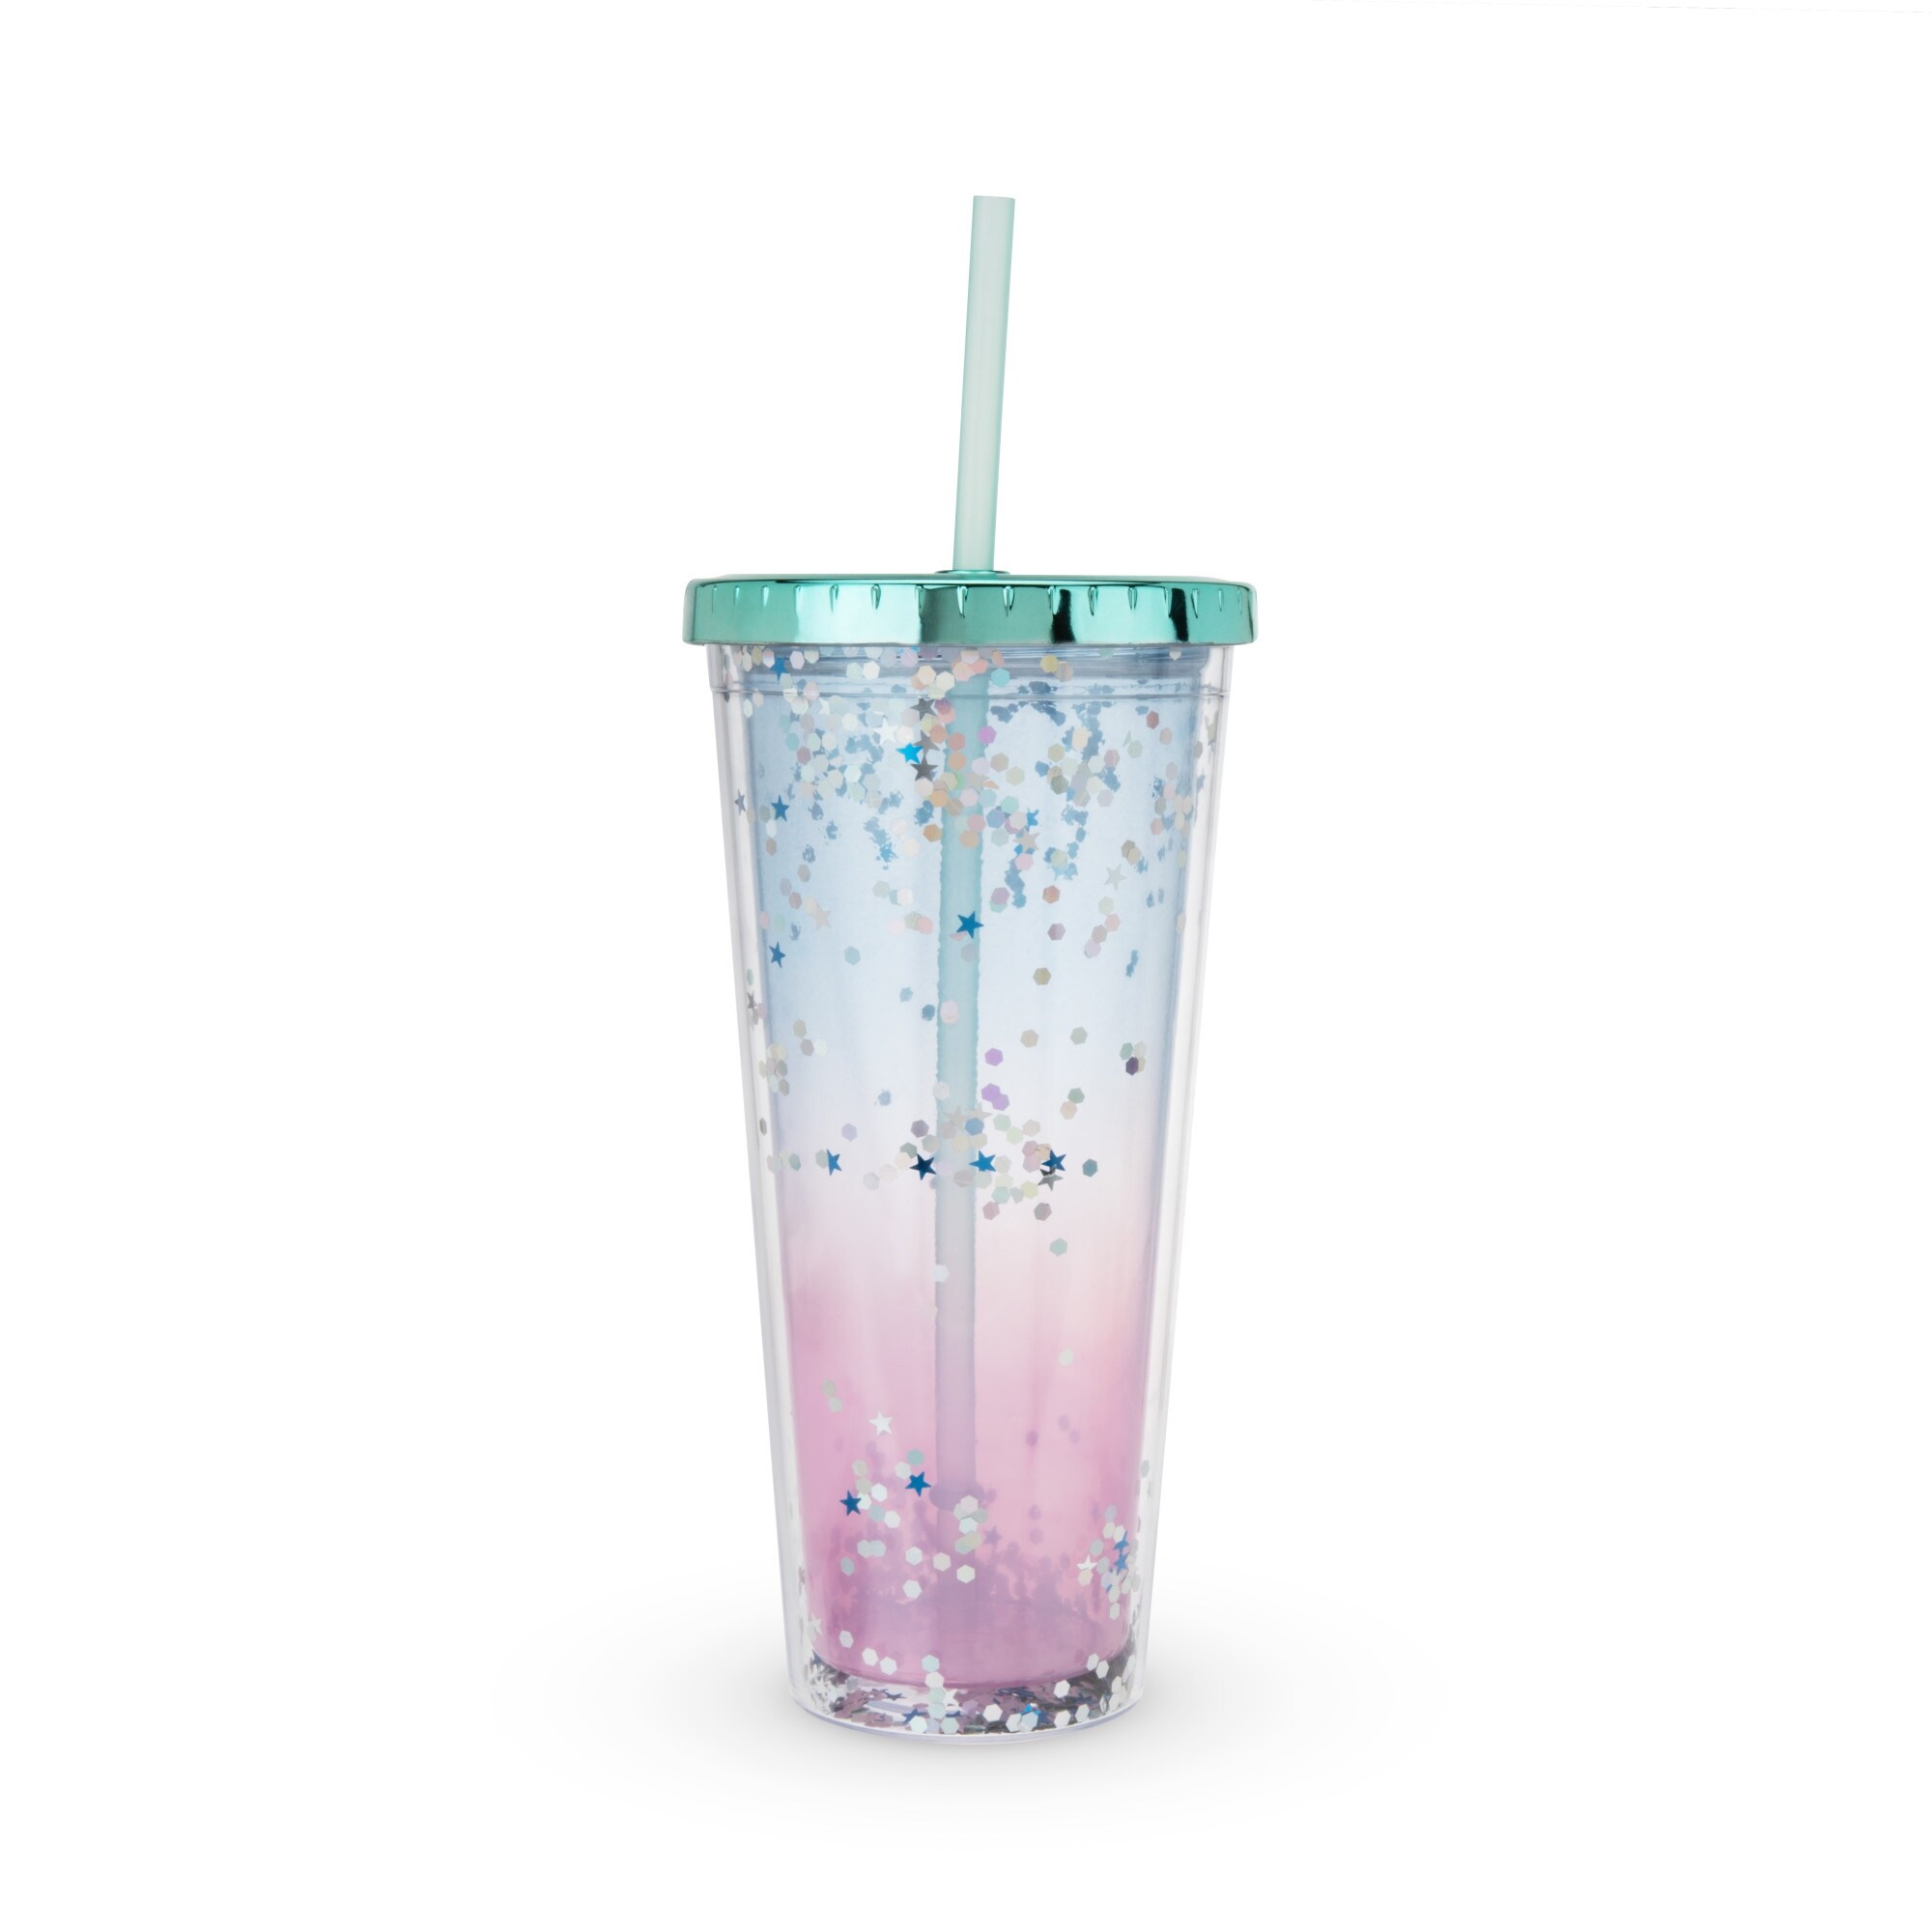 Mermaid Vibes 16oz. Glass Cup and Straw with Bamboo Lid